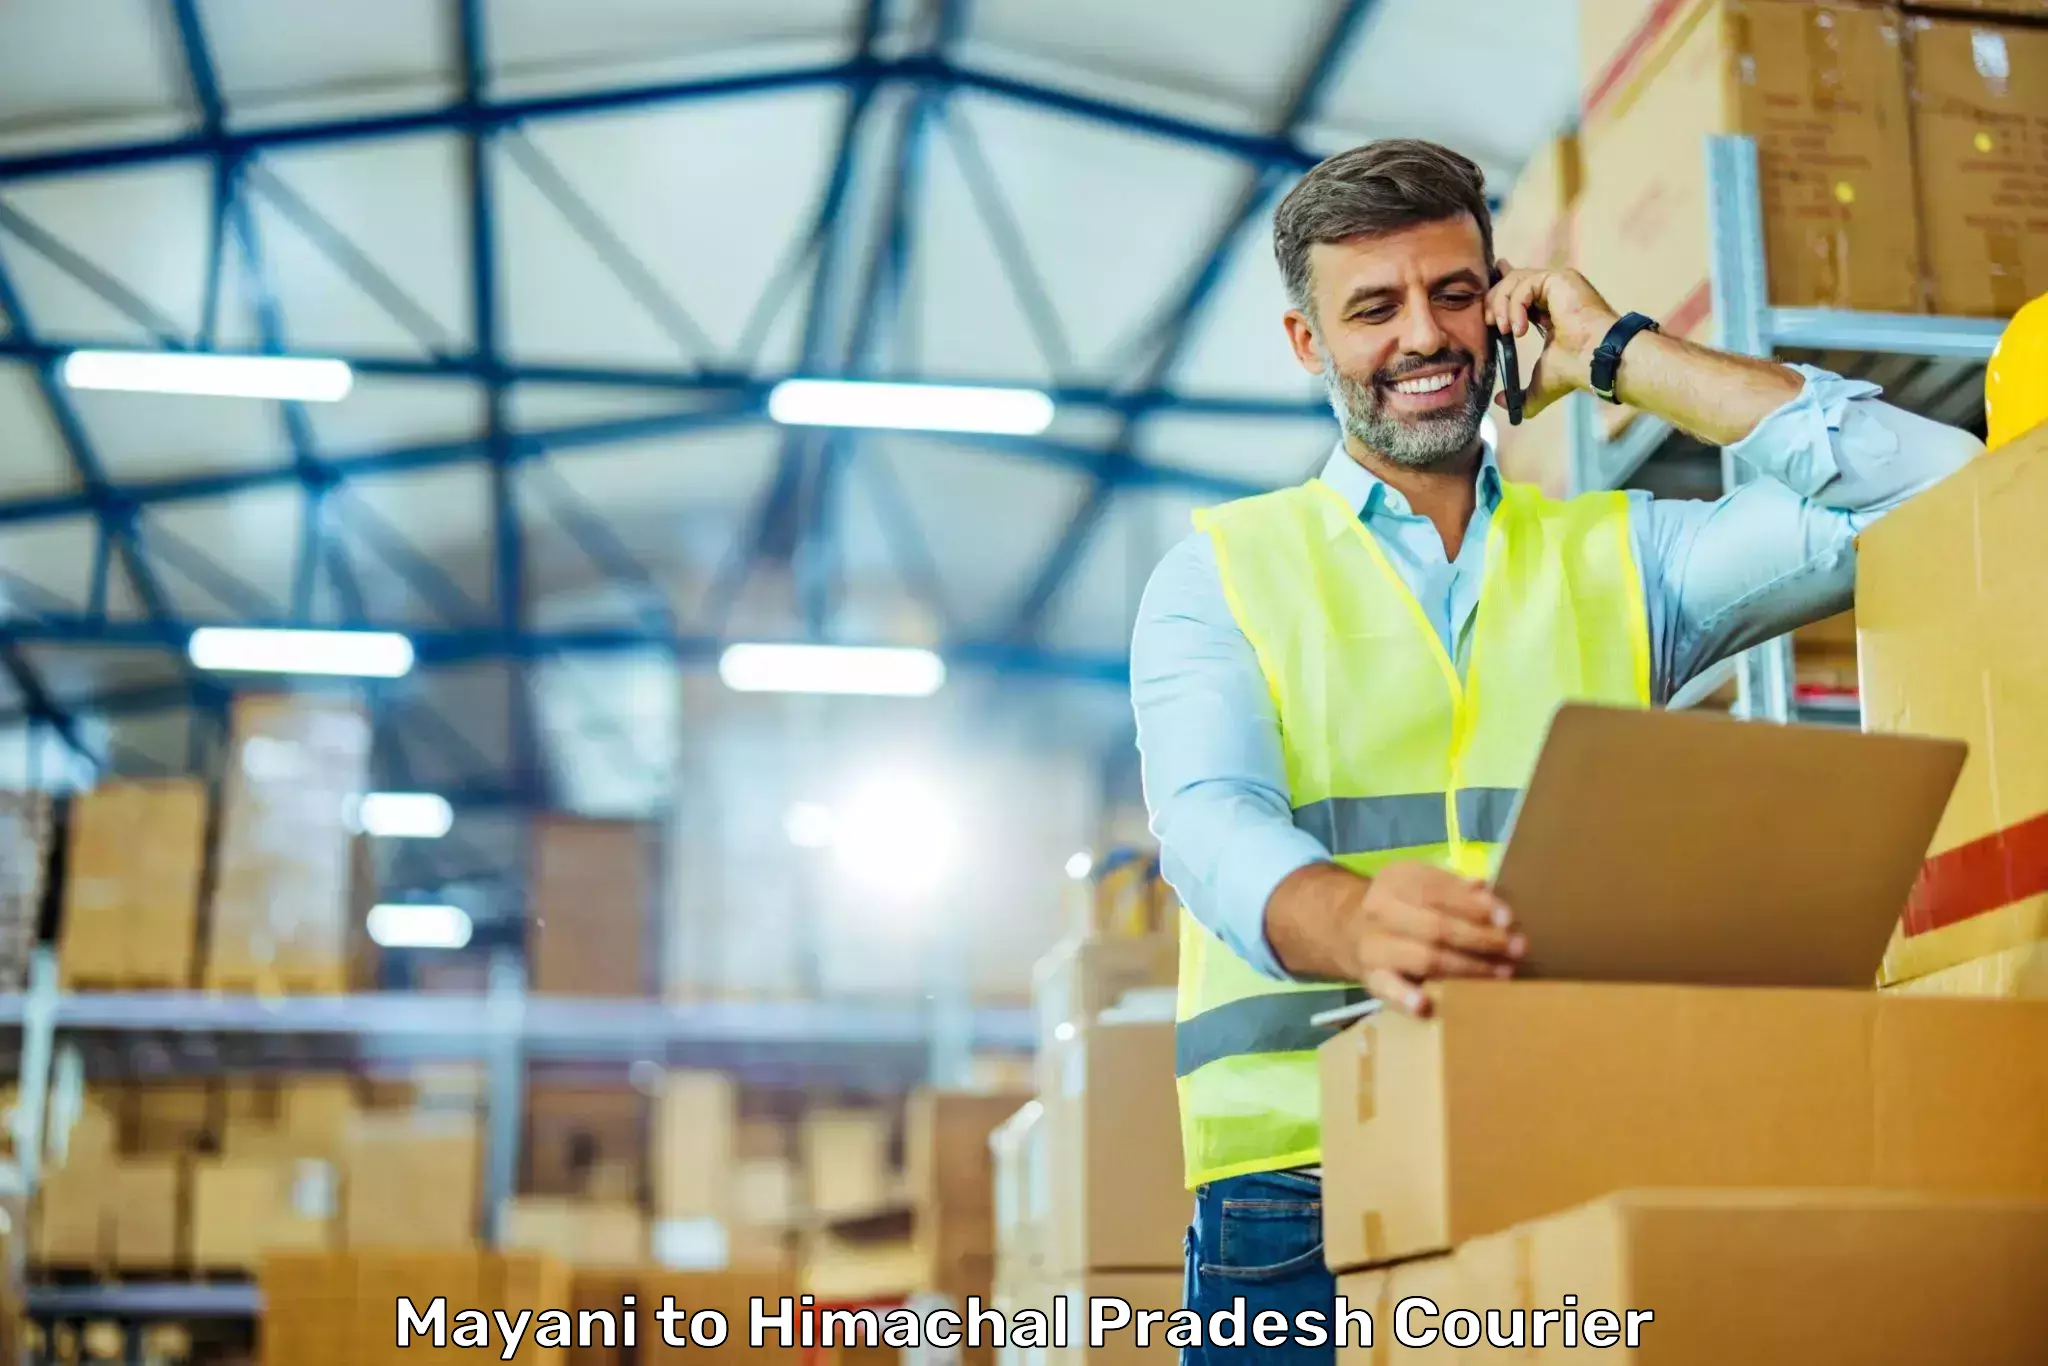 Cash on delivery service Mayani to Kotkhai